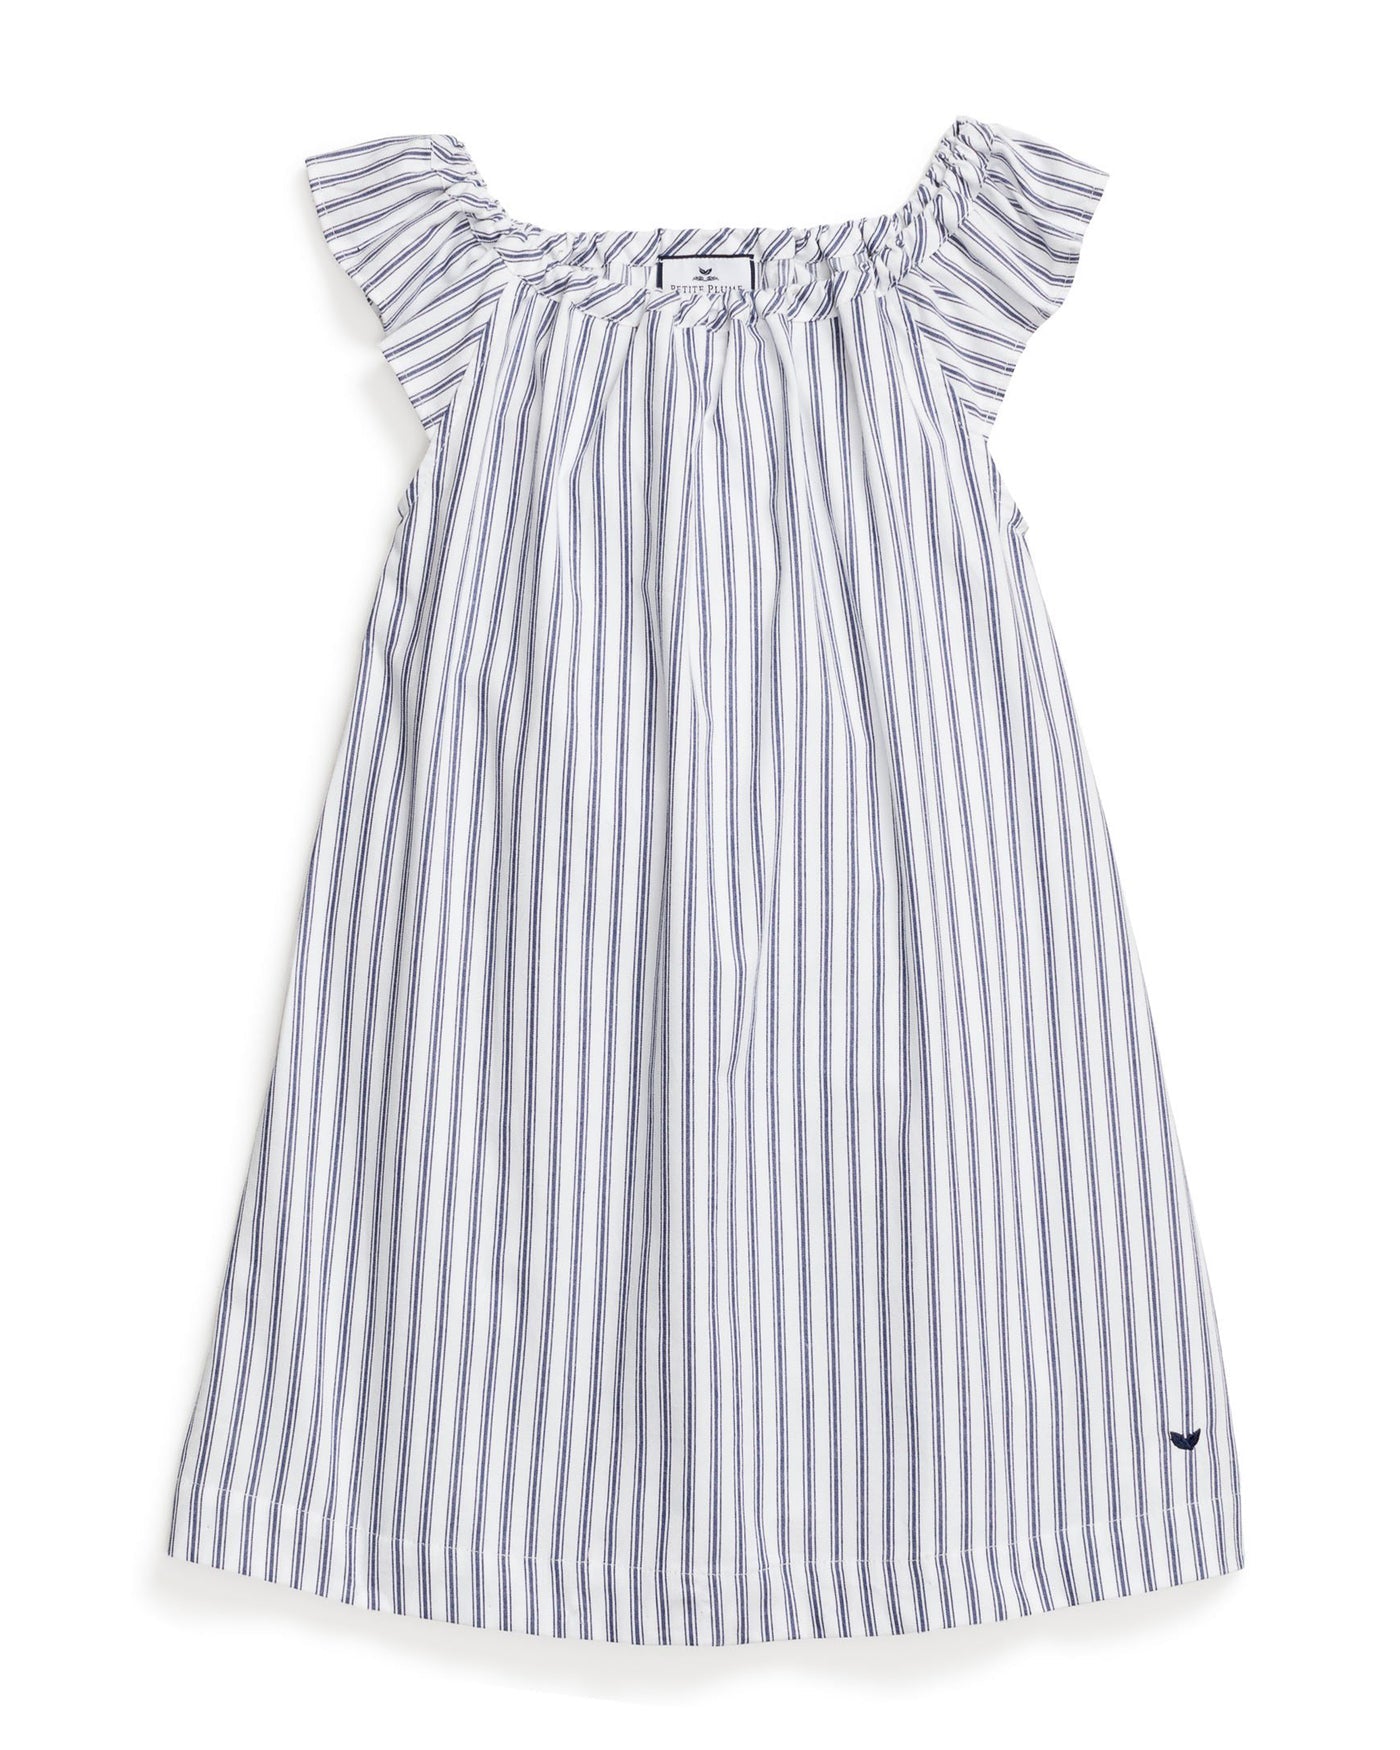 Petite Plume Navy French Ticking Isabelle Nightgown